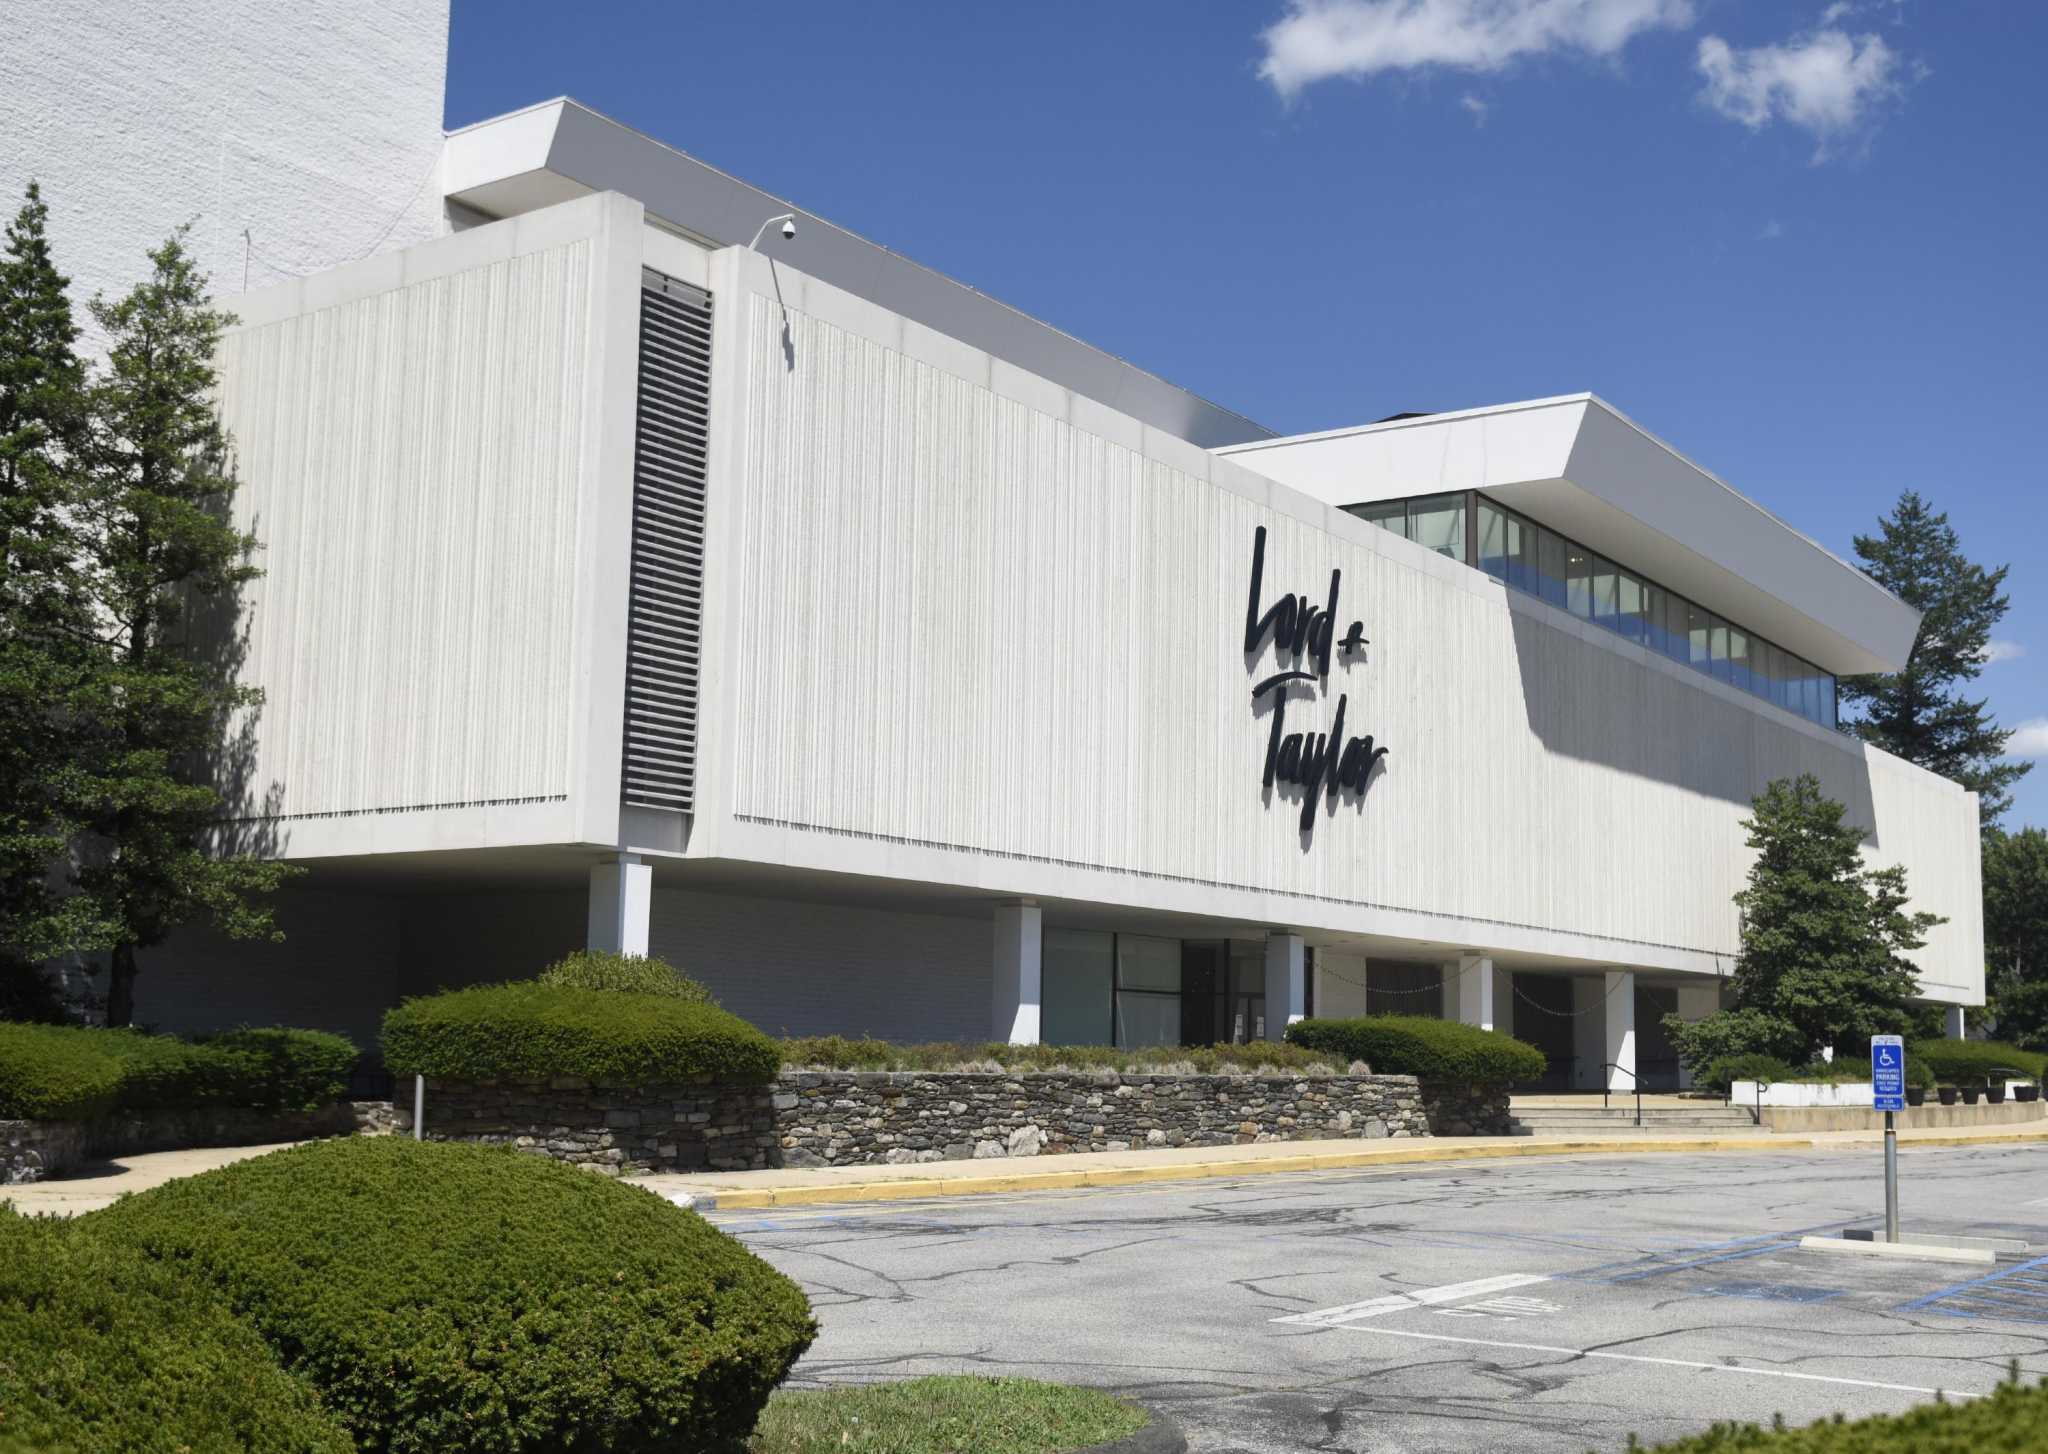 Two Westfield schools find new home at Lord & Taylor